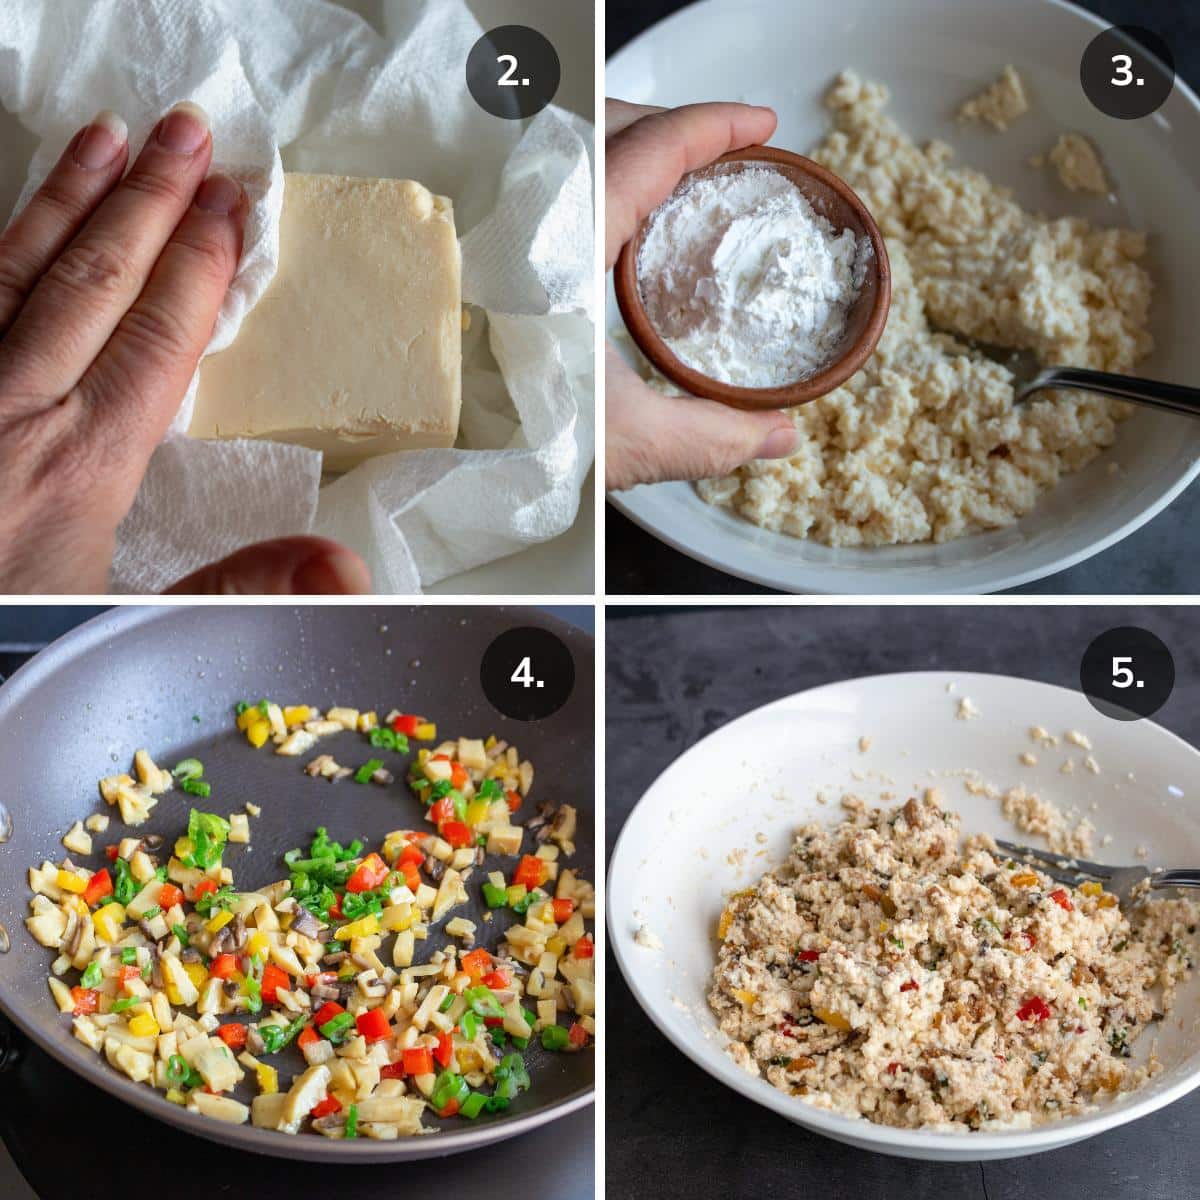 Dry the tofu, adding cornstarch, cooking vegetables and putting them in the tofu mix. 